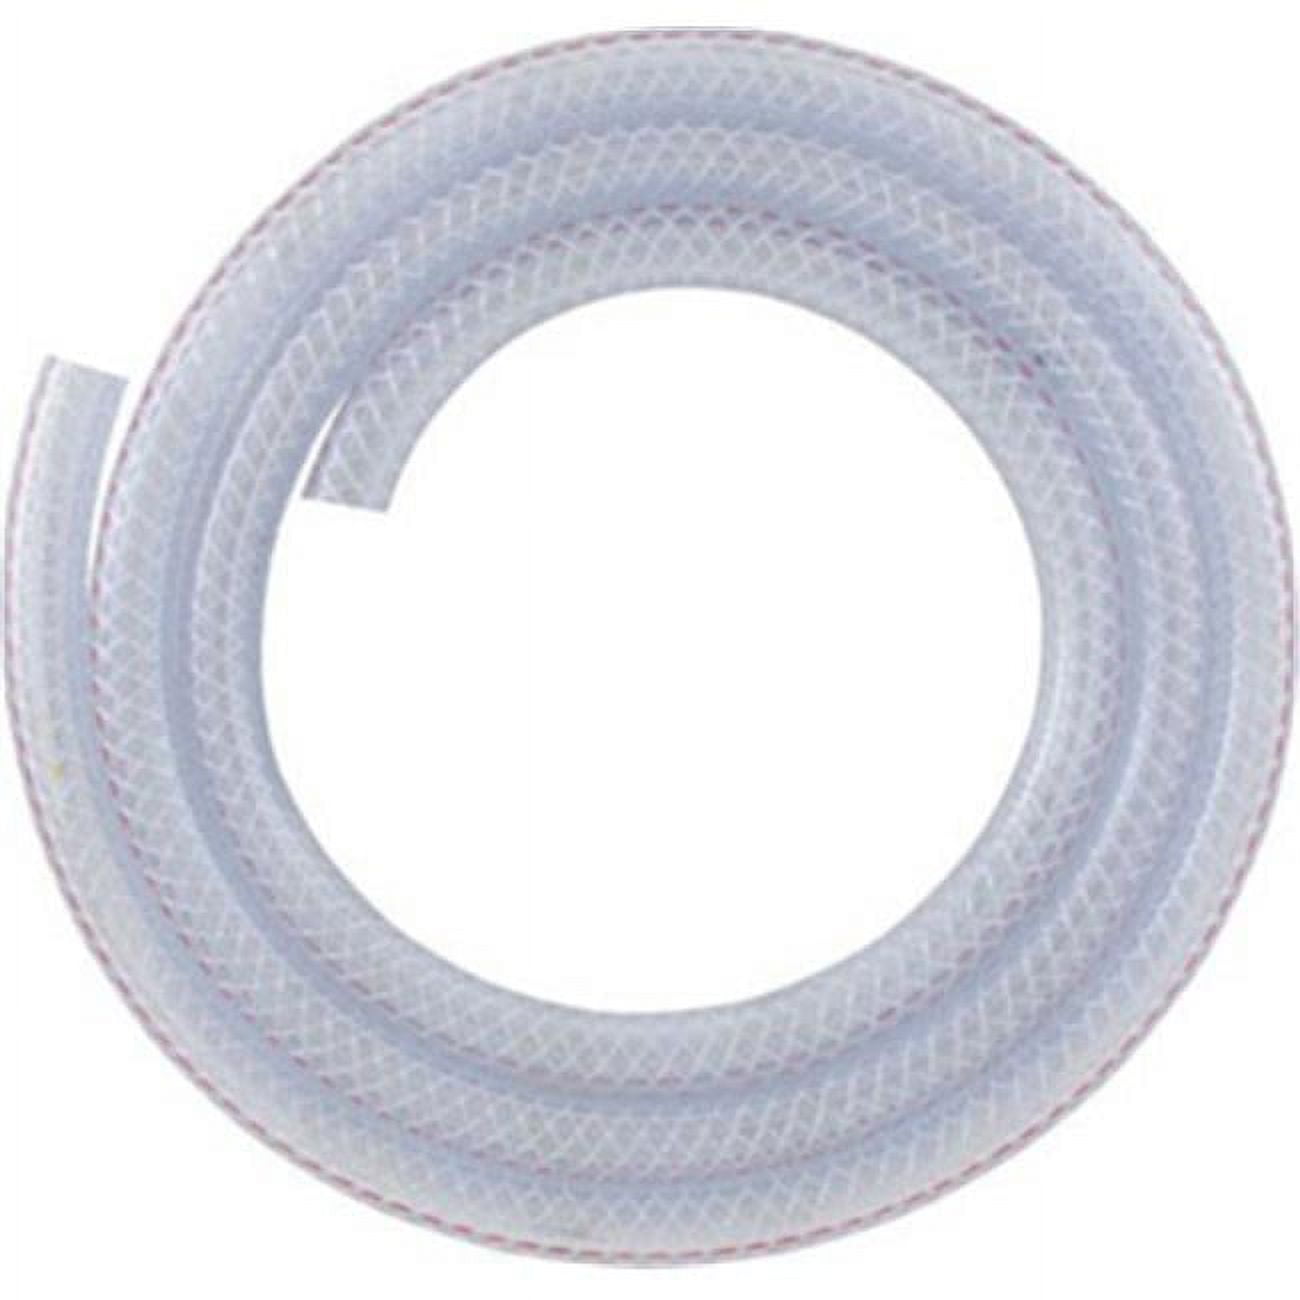 516 B3810 10 Ft. Braided Tubing, Clear - 0.38 X 0.63 In.